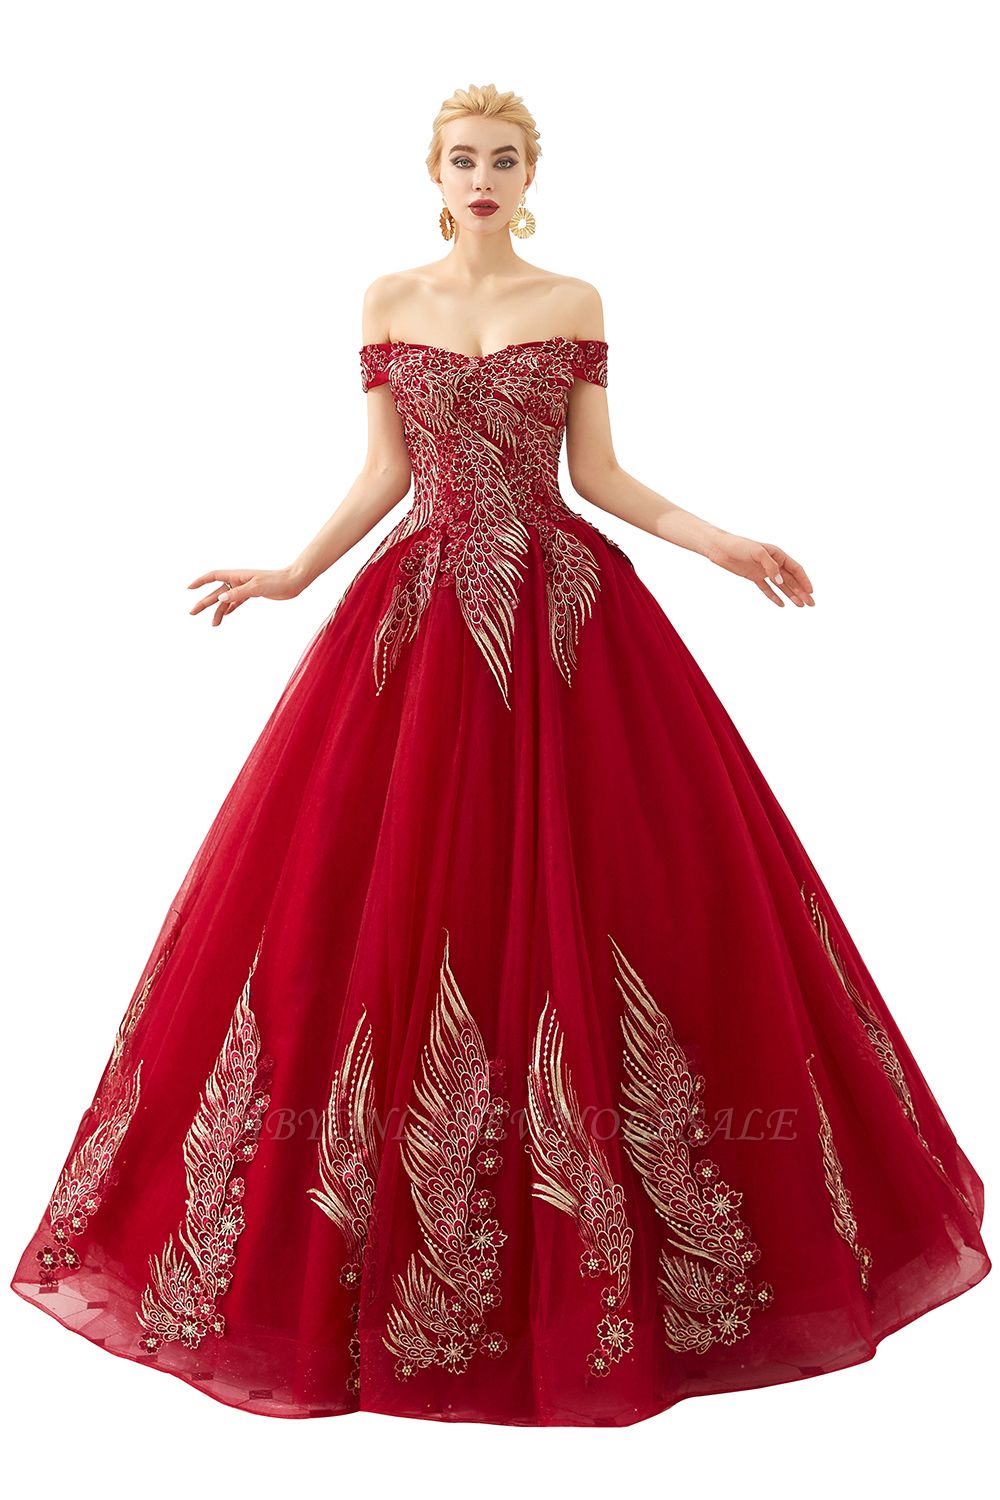 Henry | Elegant Off-the-shoulder Princess Red/Mint Prom Dress with Wing Emboirdery